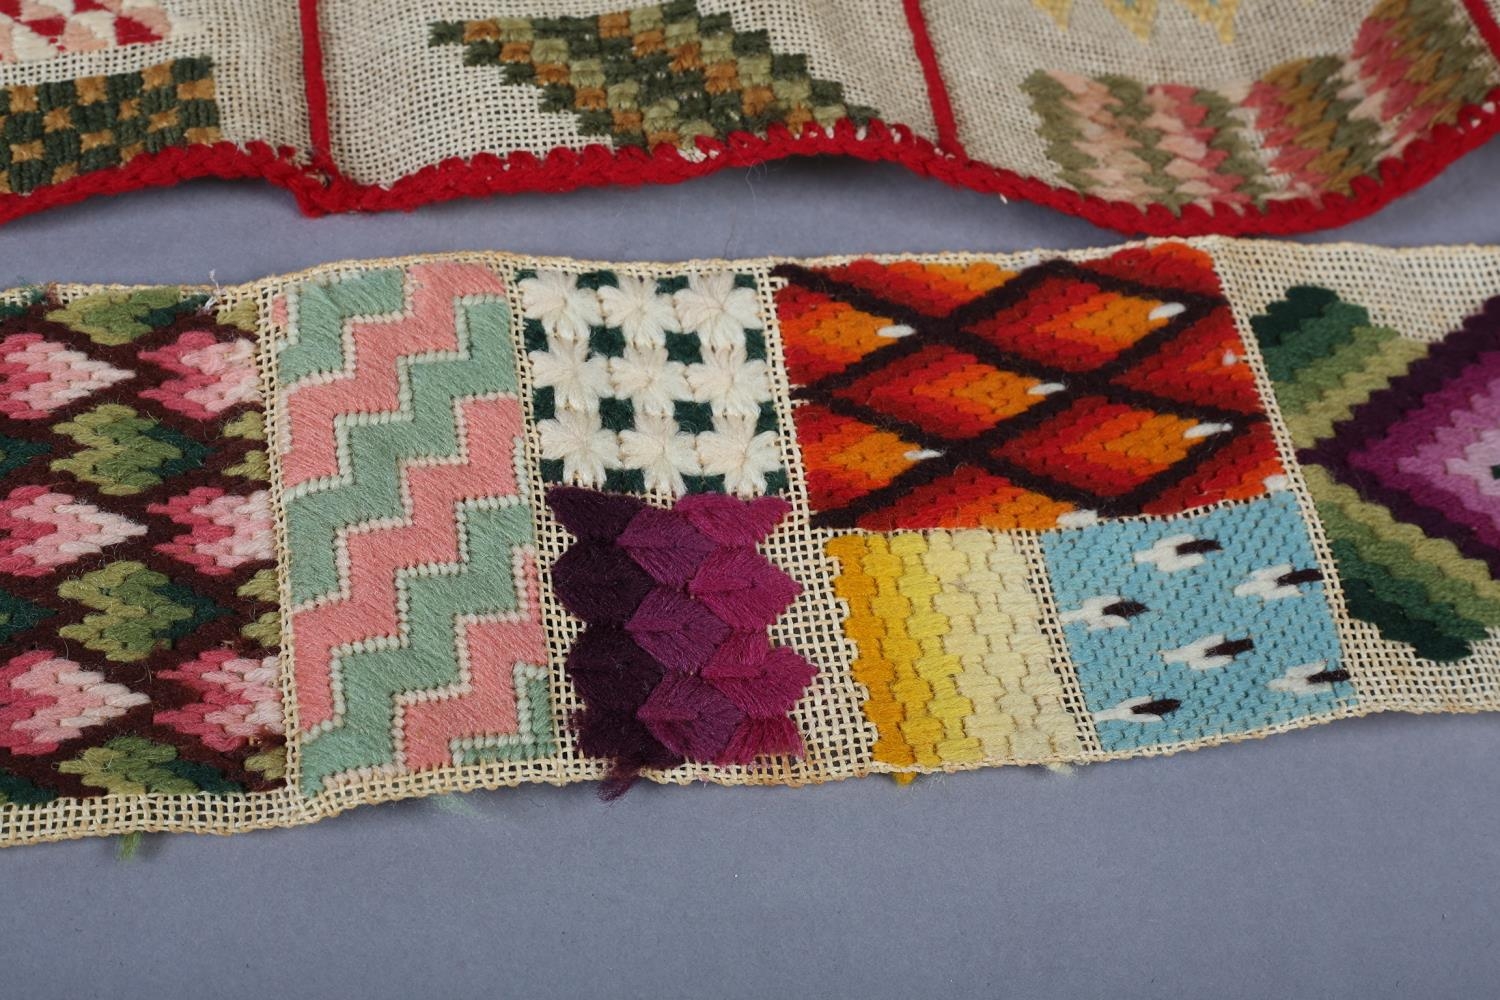 Berlin woolwork: spot samplers, on canvas, one dated 1834, the first in rectangular form, divided - Image 2 of 5